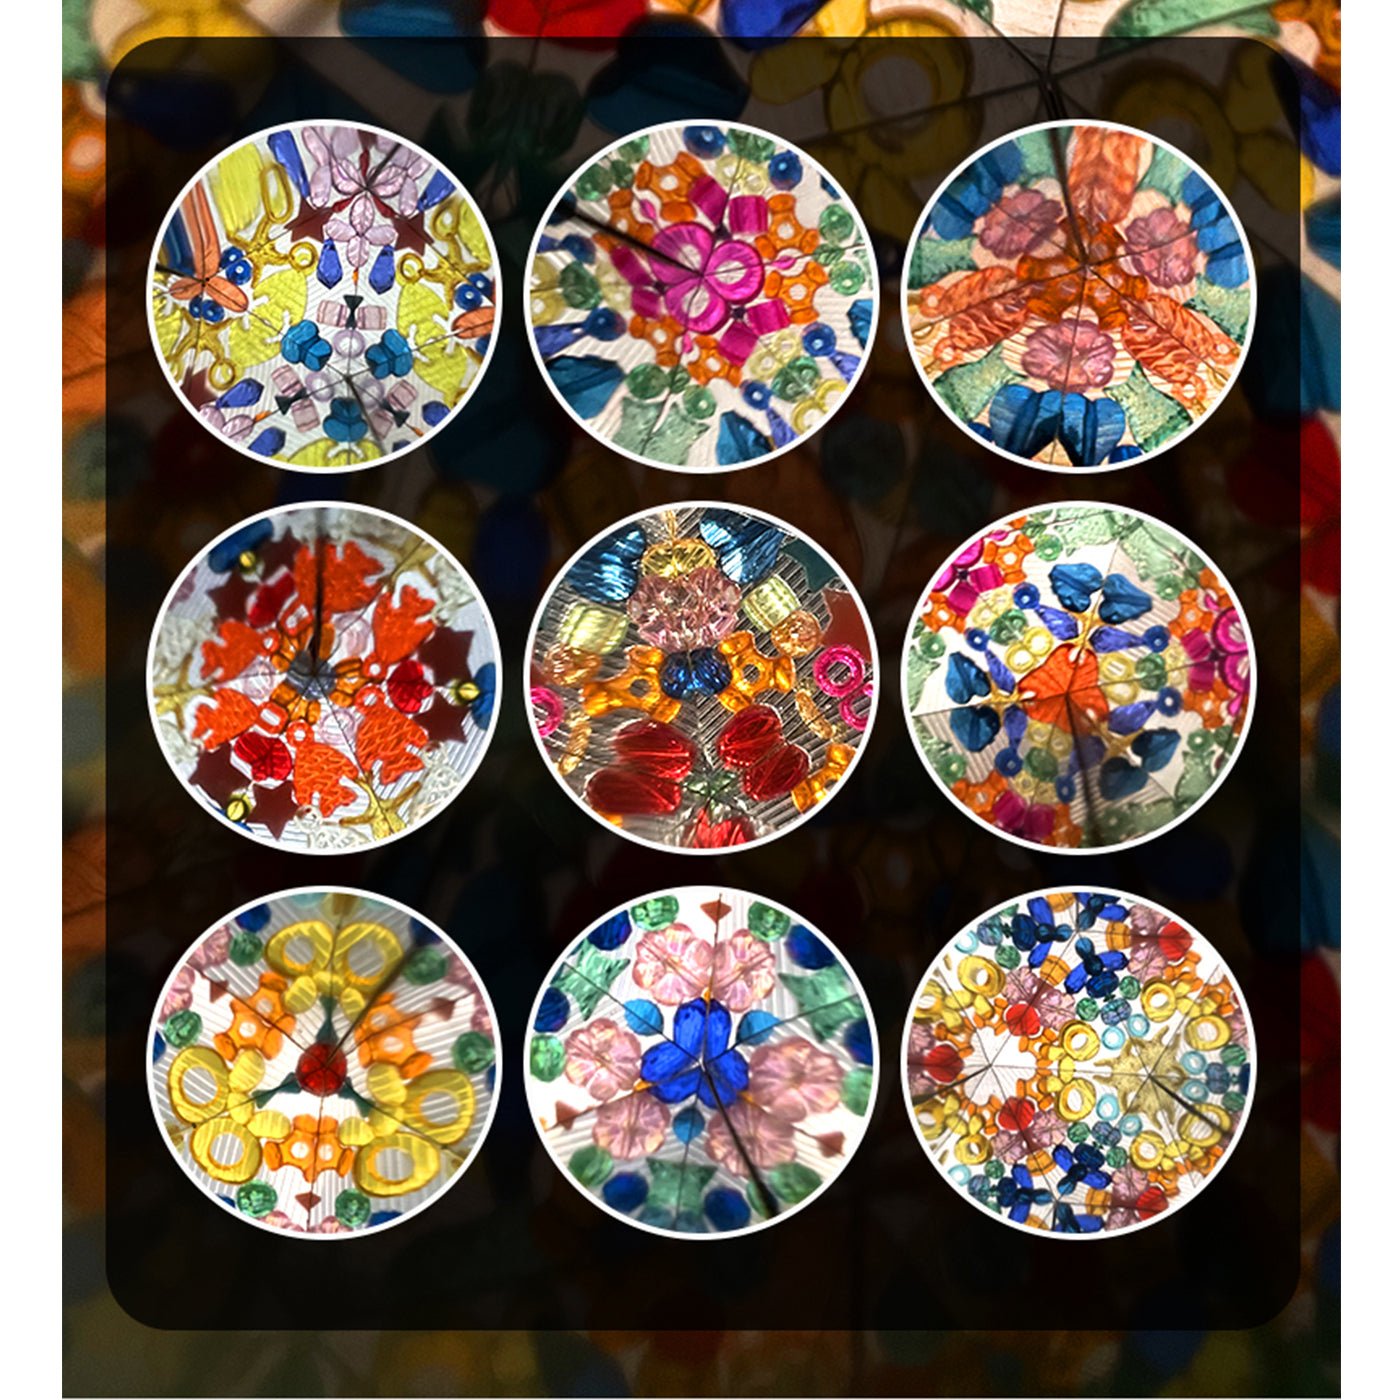 Colorful Kaleidoscope- Into The Forest - 0cm